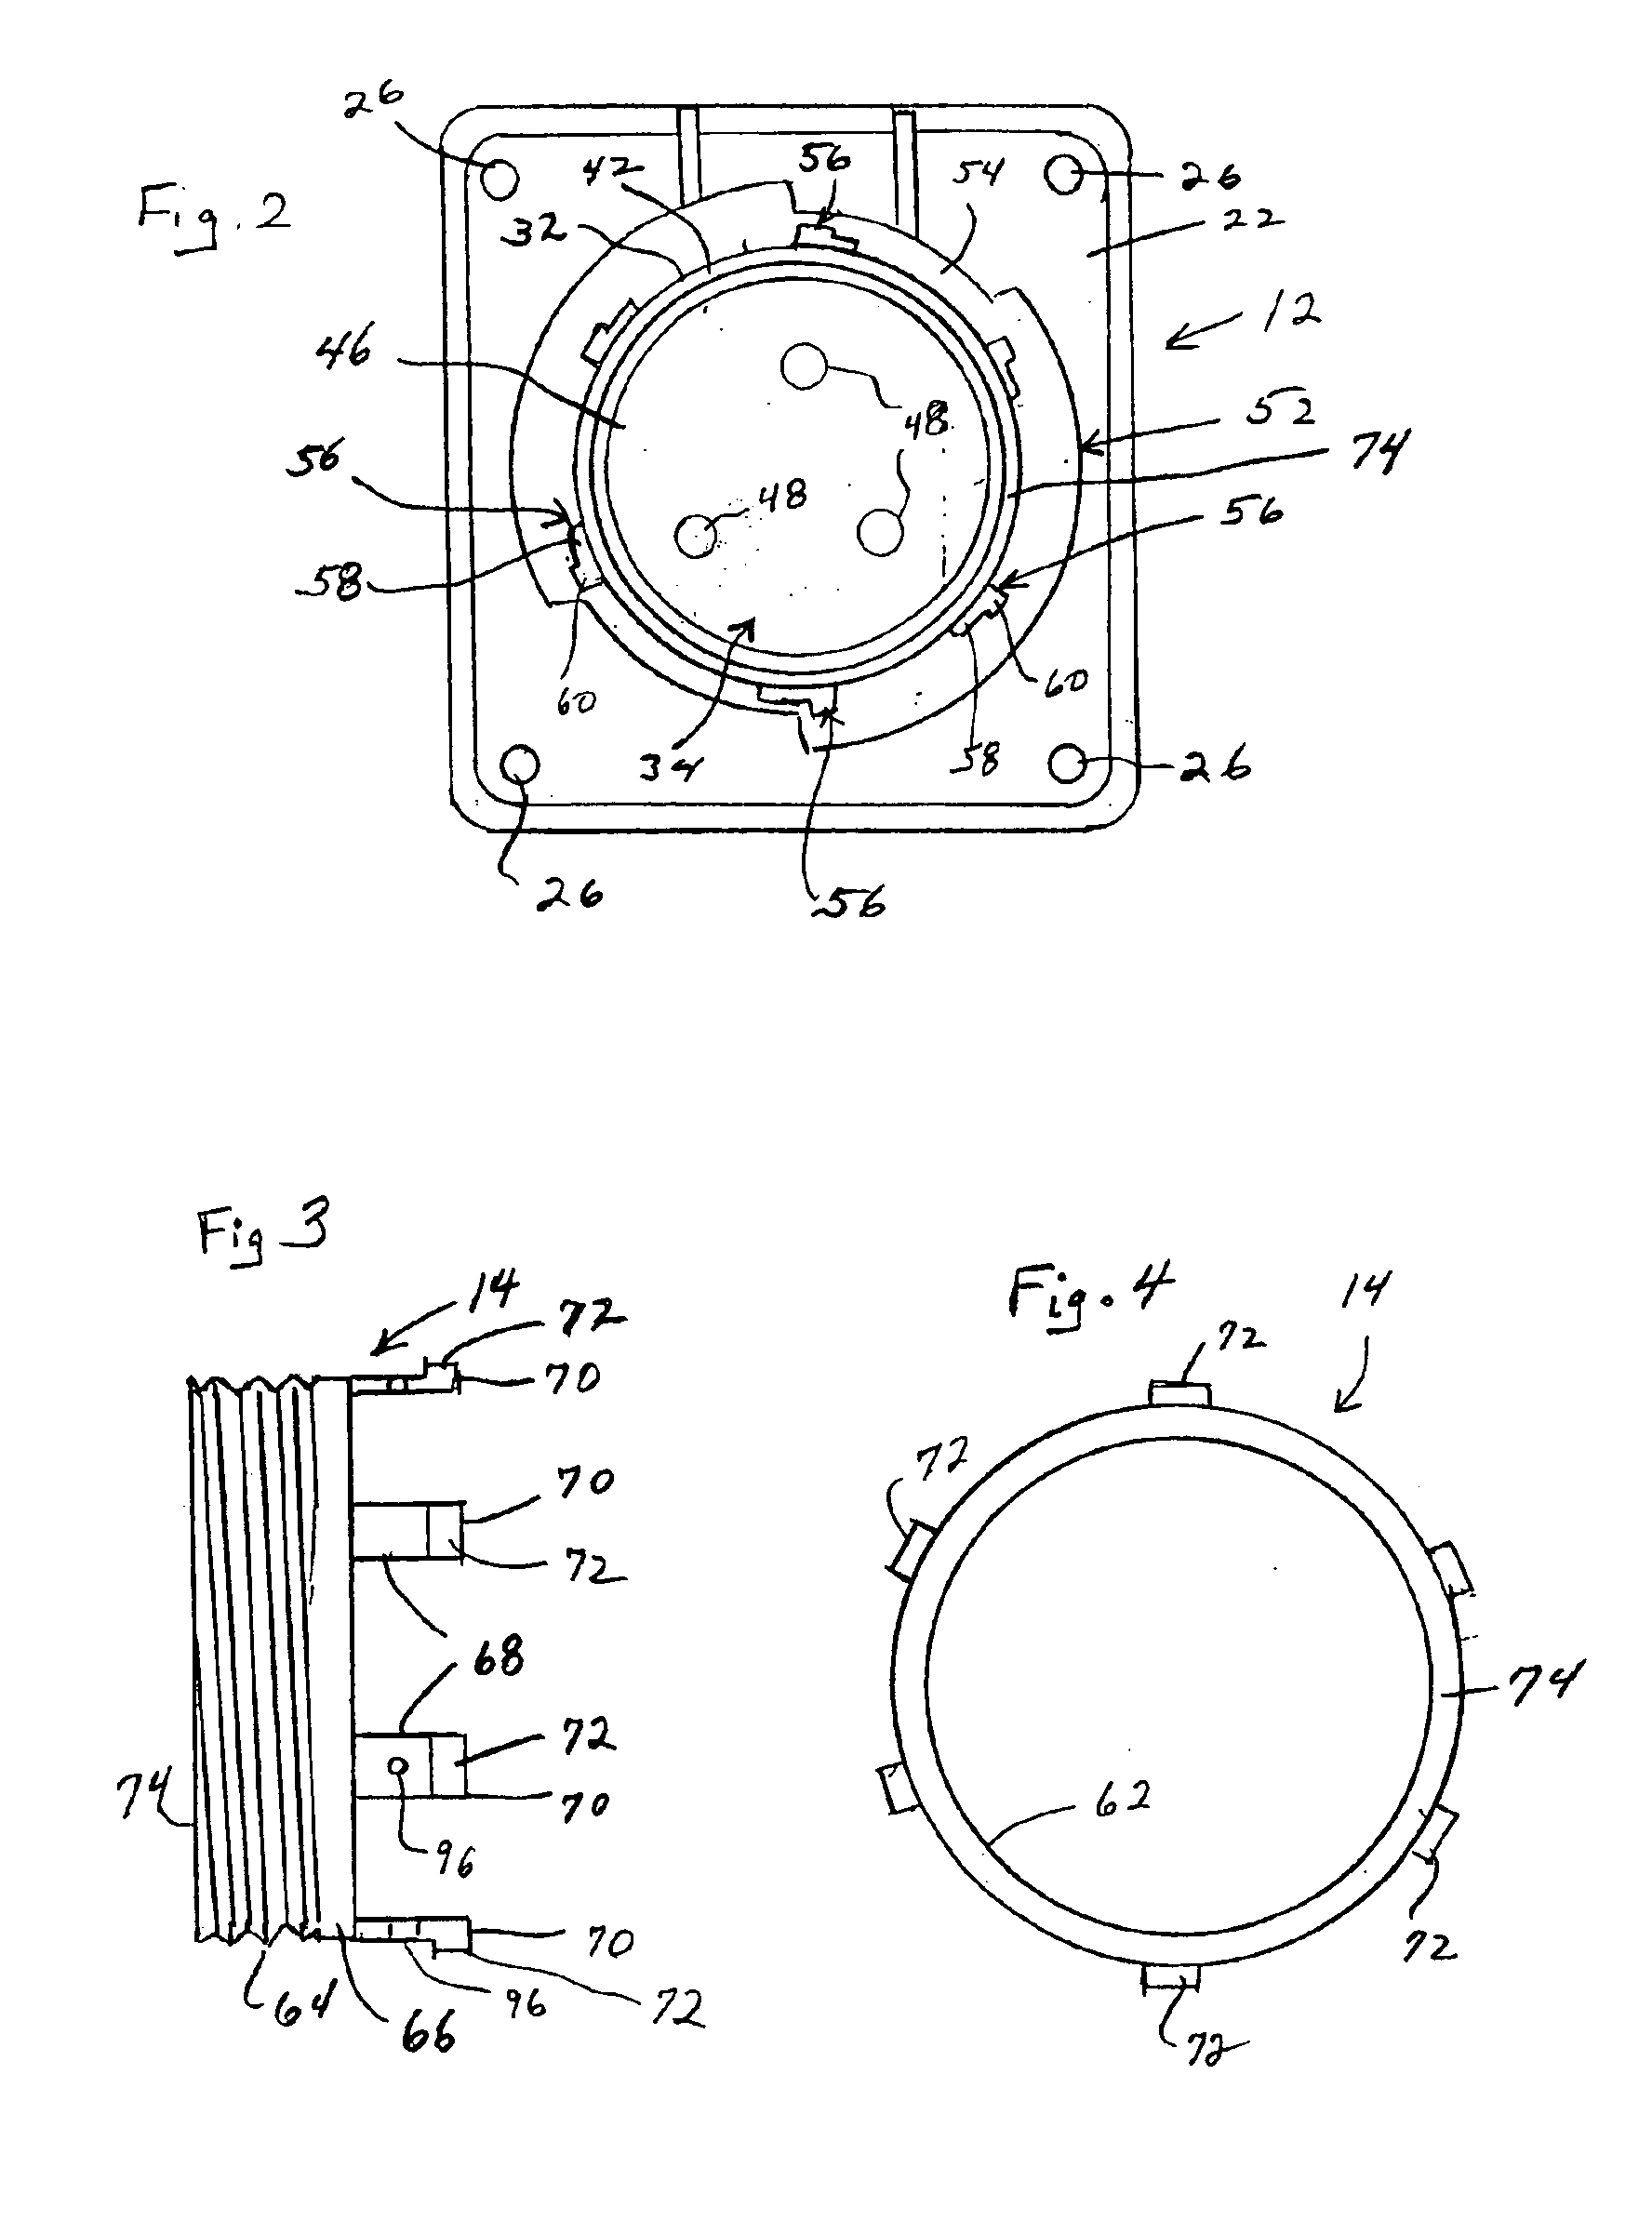 Electrical connector with metal coupling sleeve